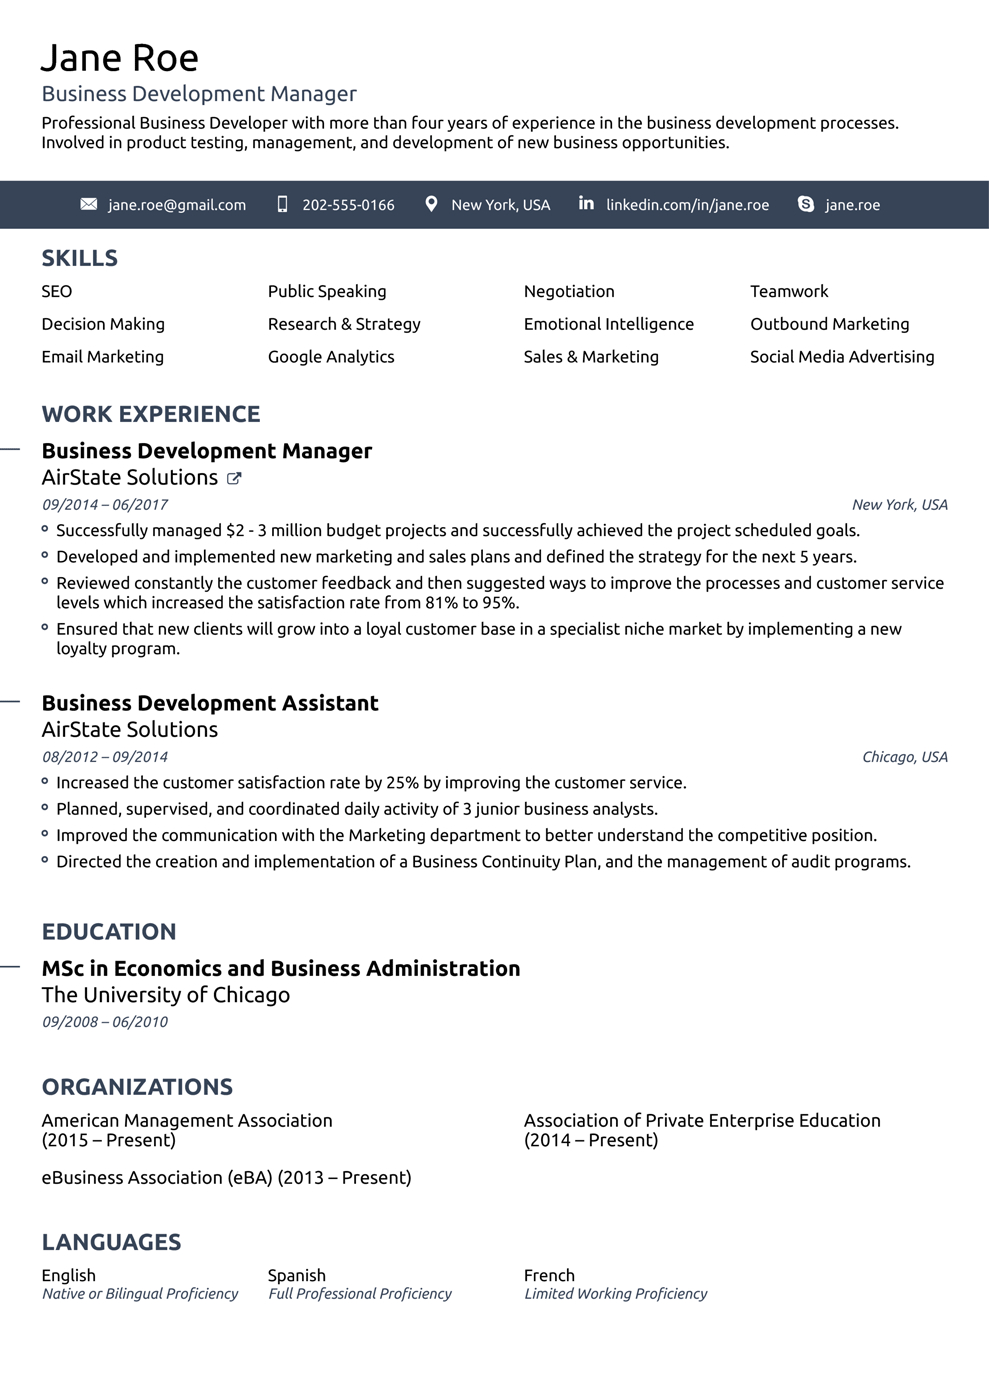 Resume Tips Templates 2019 Free Resume Templates You Can Download Quickly Novorsum